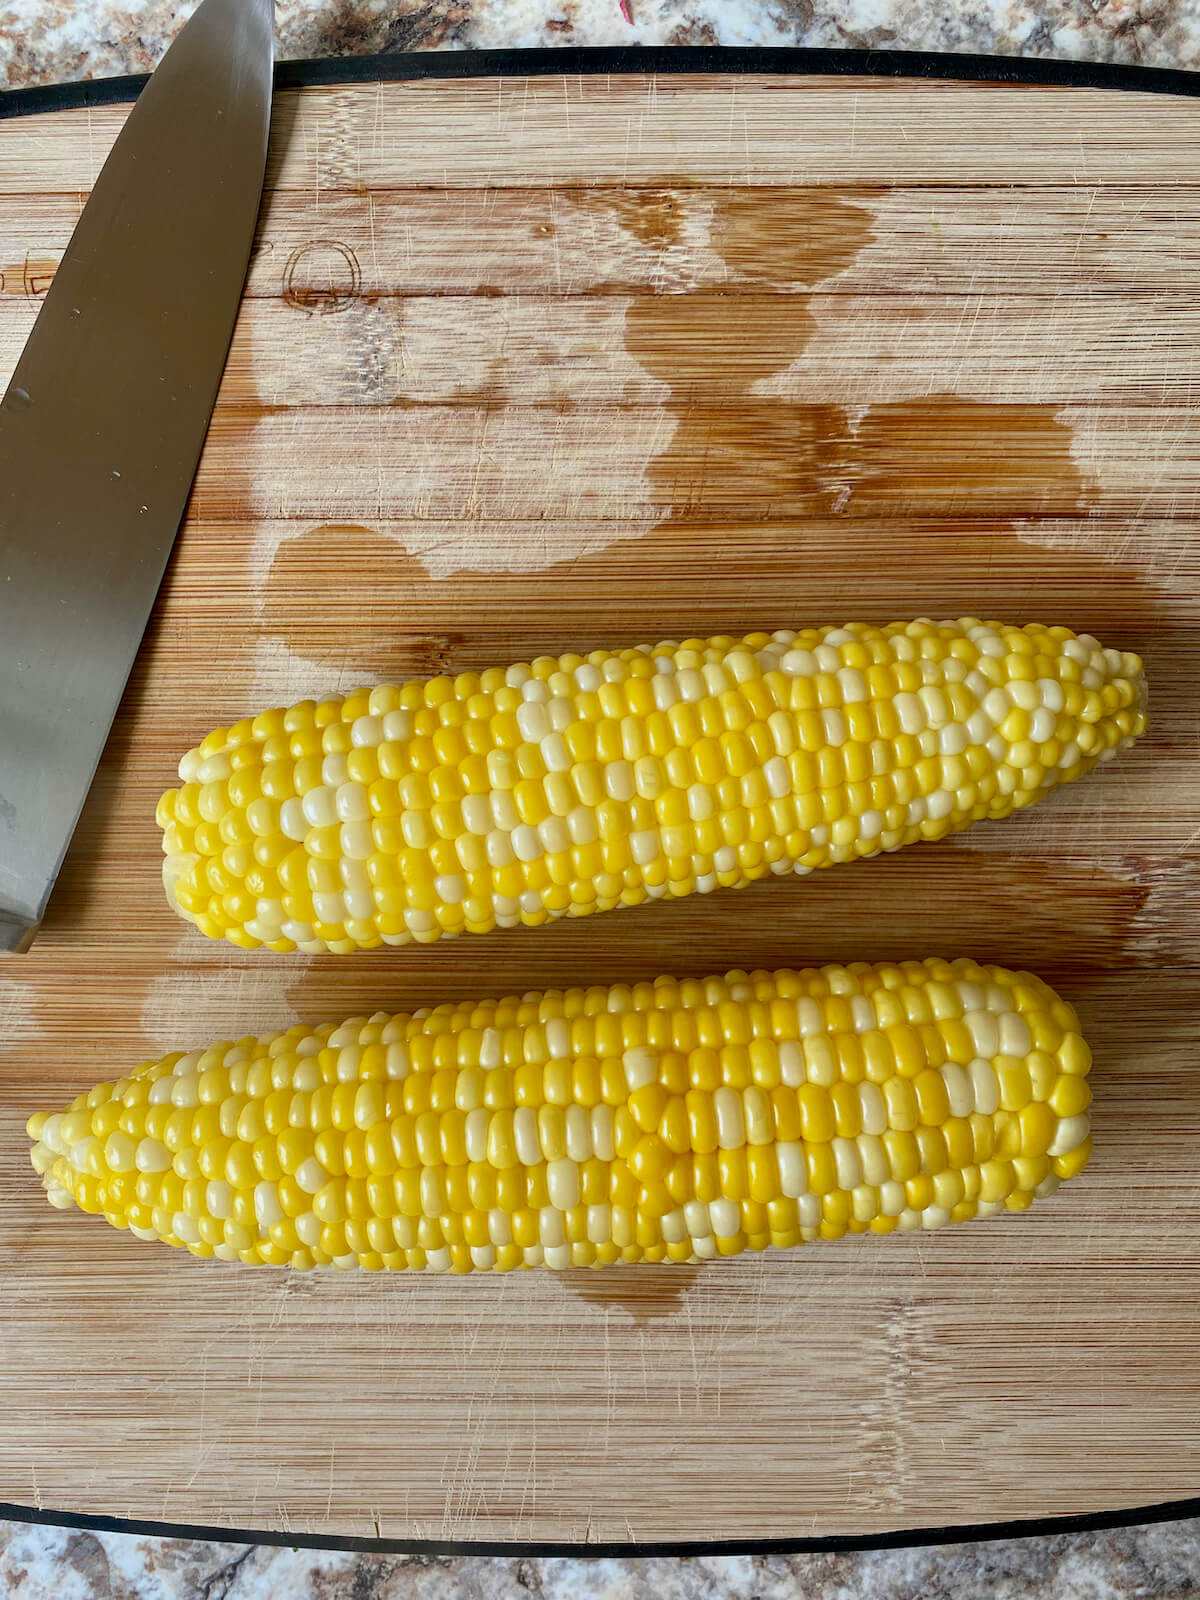 Two cooked ears of fresh corn on the cob on a bamboo cutting board next to a knife.